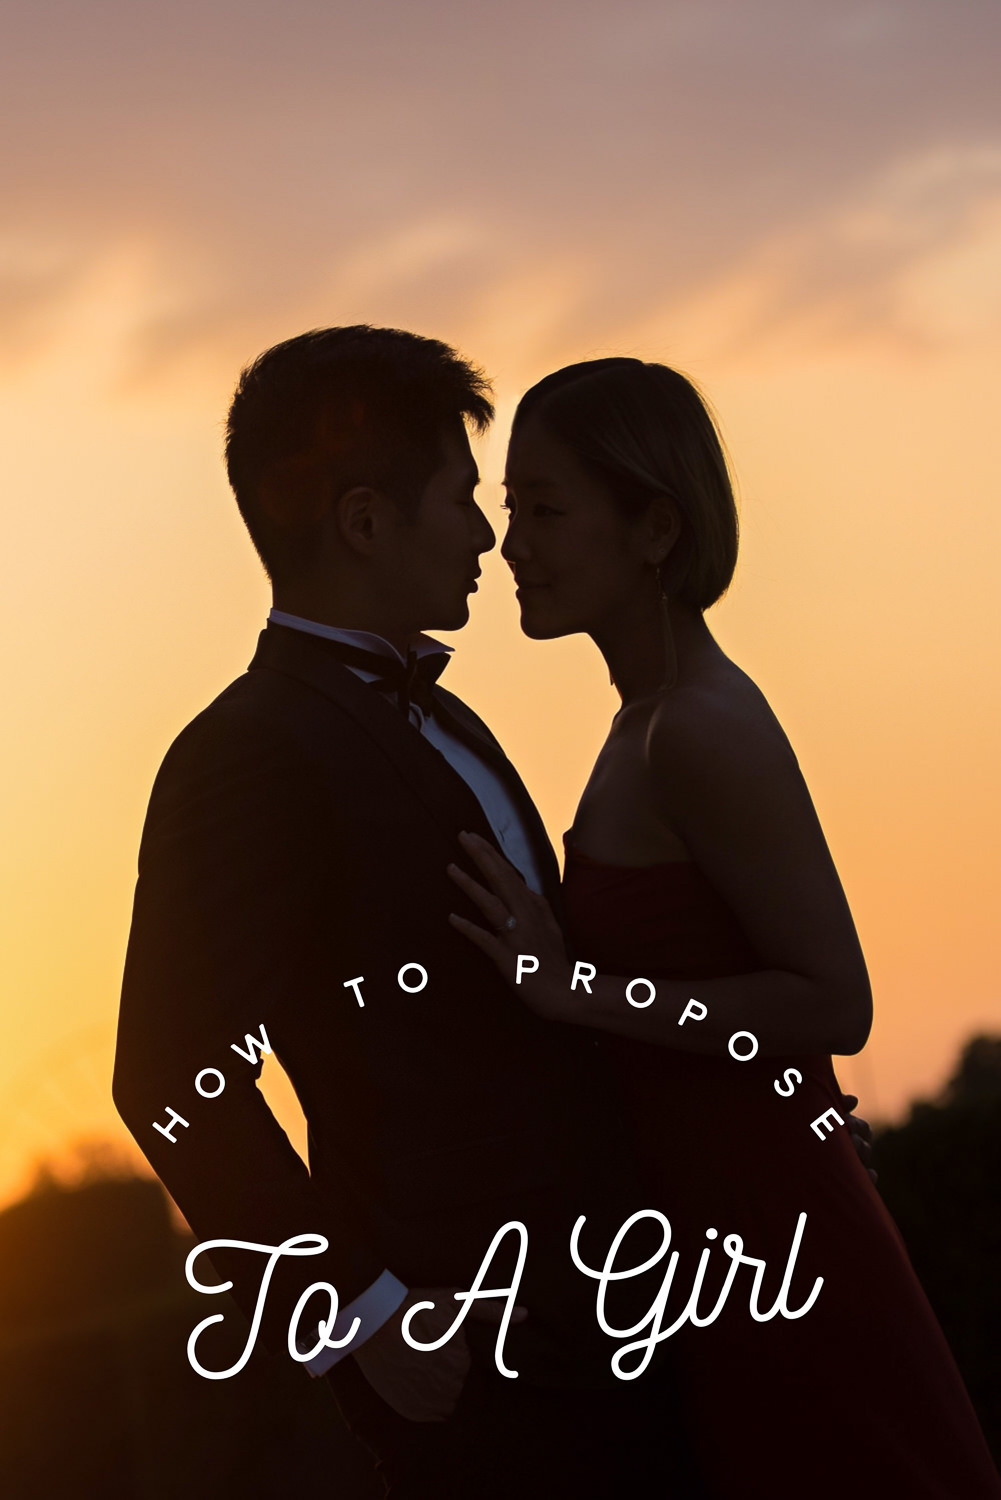 How to propose to a girl romantic proposal ideas